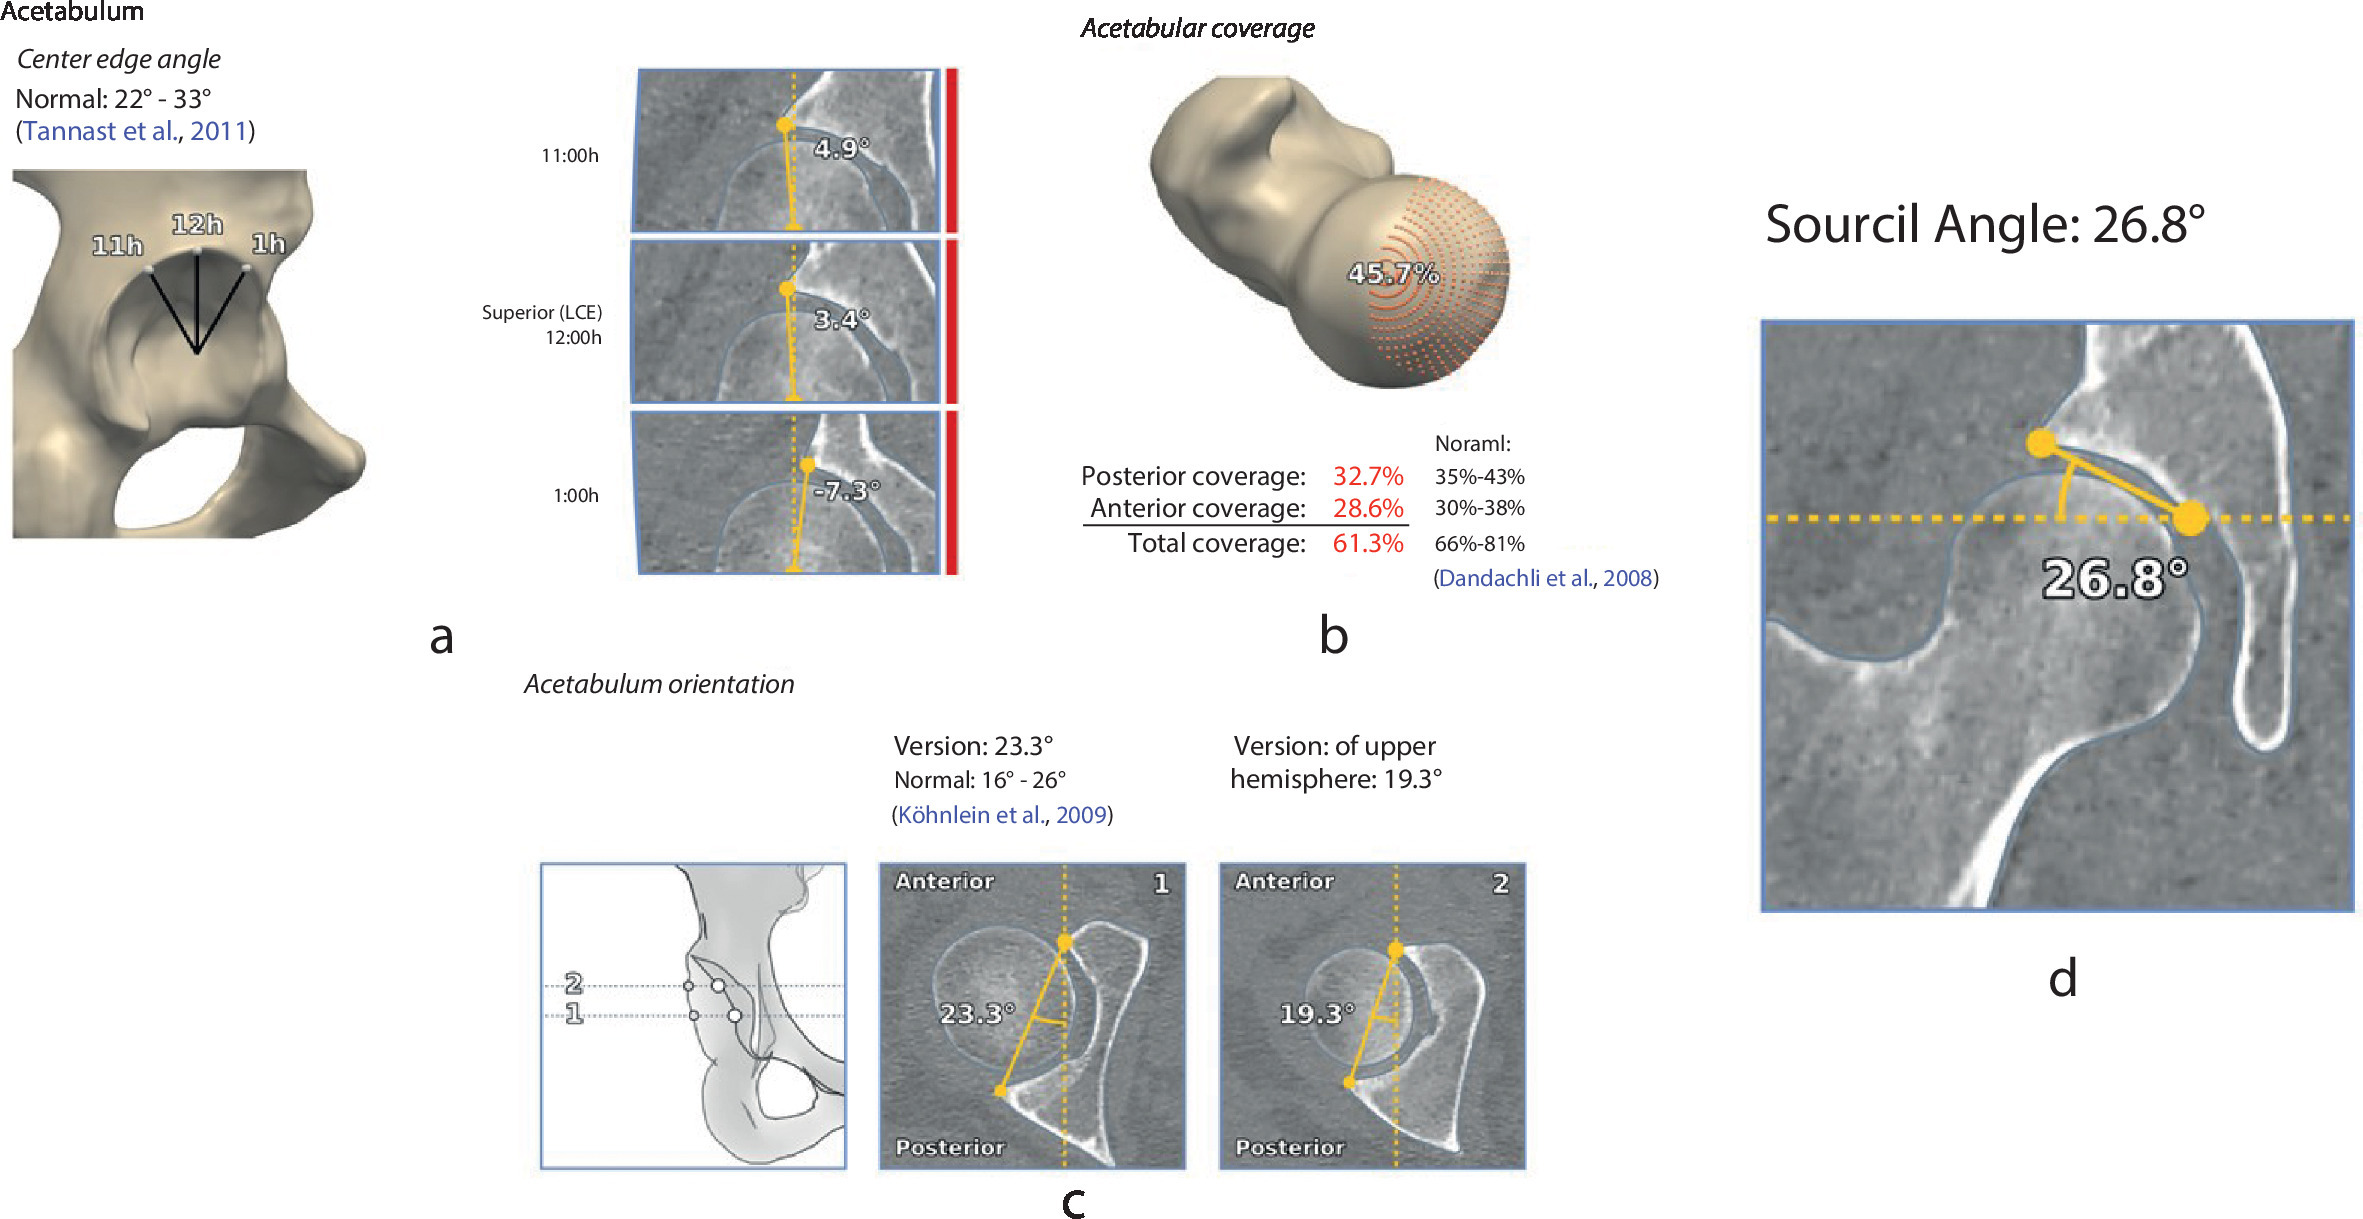 Fig. 2 
            Sample of 3D CT measurements depicting a) lateral centre edge angle at 11:00, 12:00, and 1:00 (referred to as 13:00 in this article), b) femoral head cover, c) acetabular version, and d) acetabular index (referred to as sourcil angle by the Clinical Graphics analysis).
          